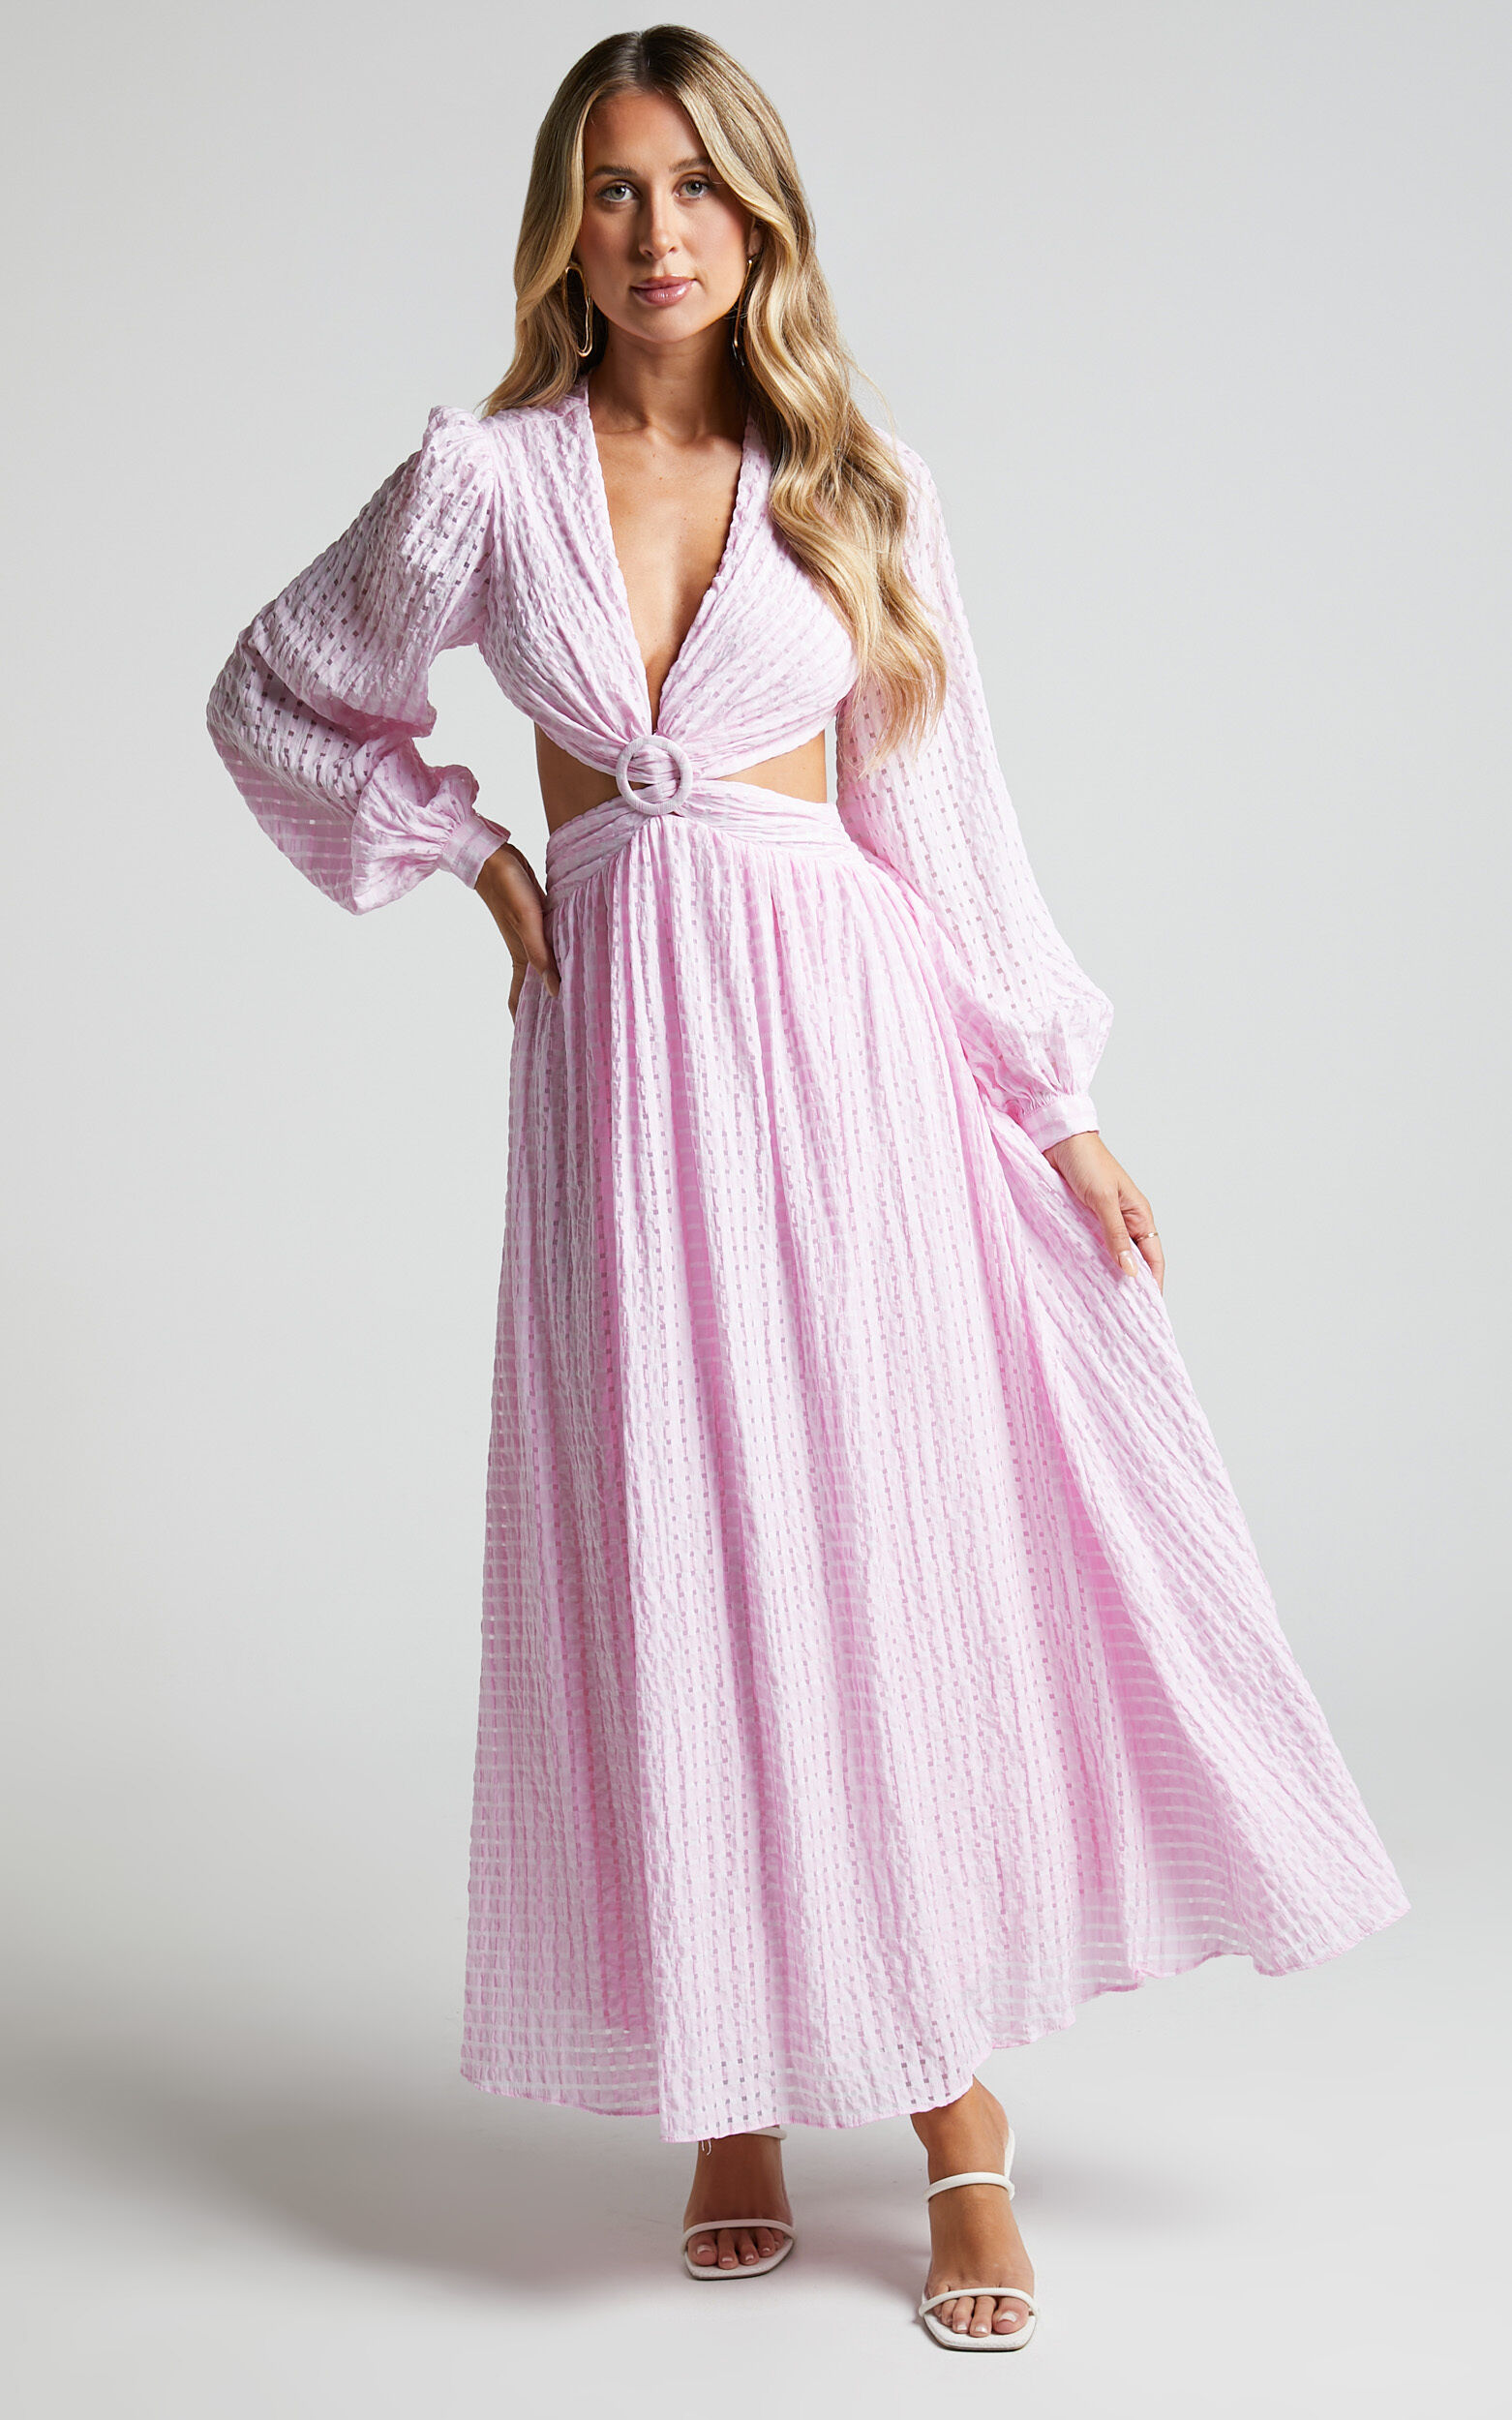 Chareese Long Sleeve Side Cut Out Plunging Neckline Textured Midi Dress in Pink - 06, PNK1, super-hi-res image number null